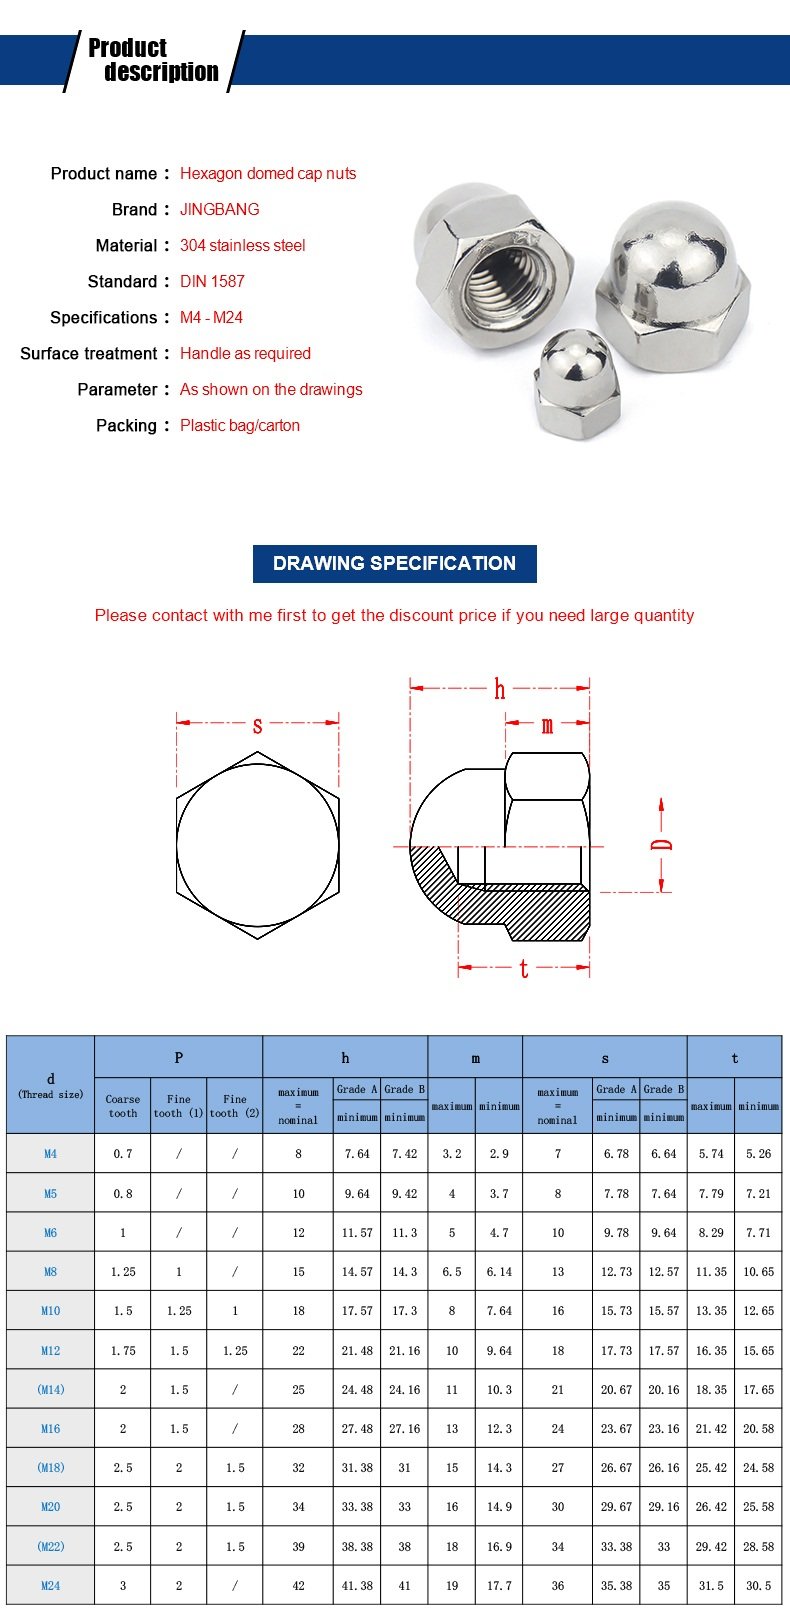 A4-70 Stainless Steel HEX Cap Nuts